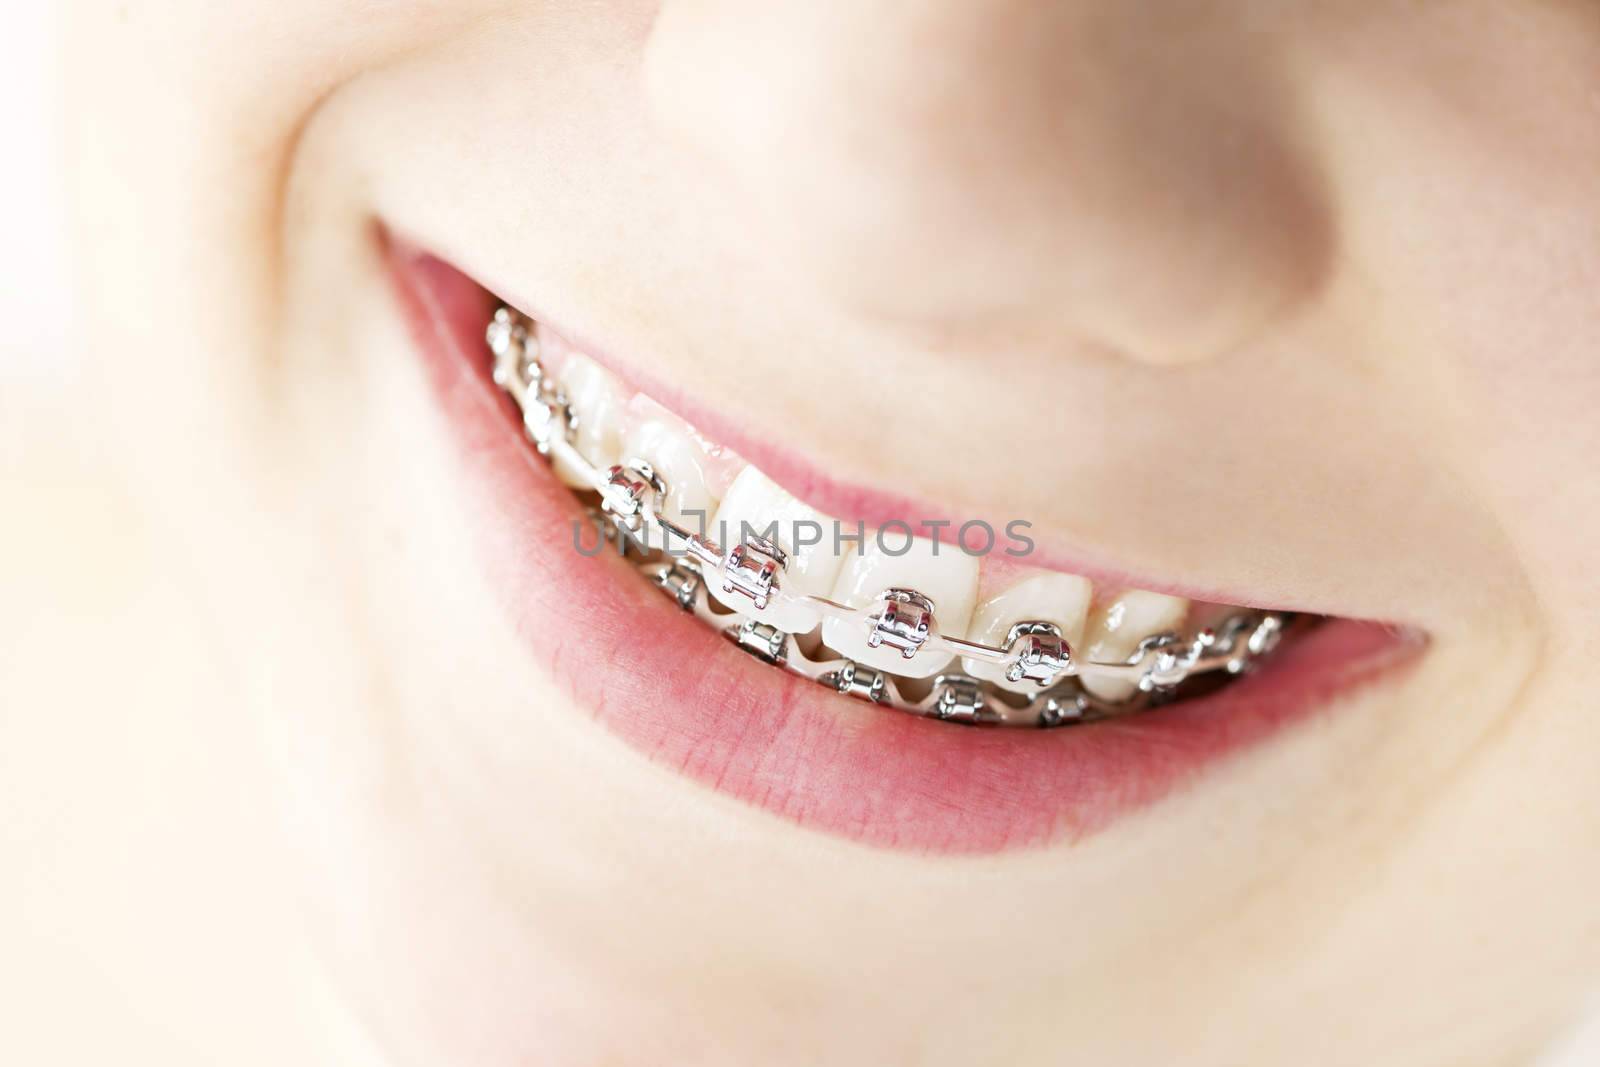 Closeup on braces and white teeth of smiling girl